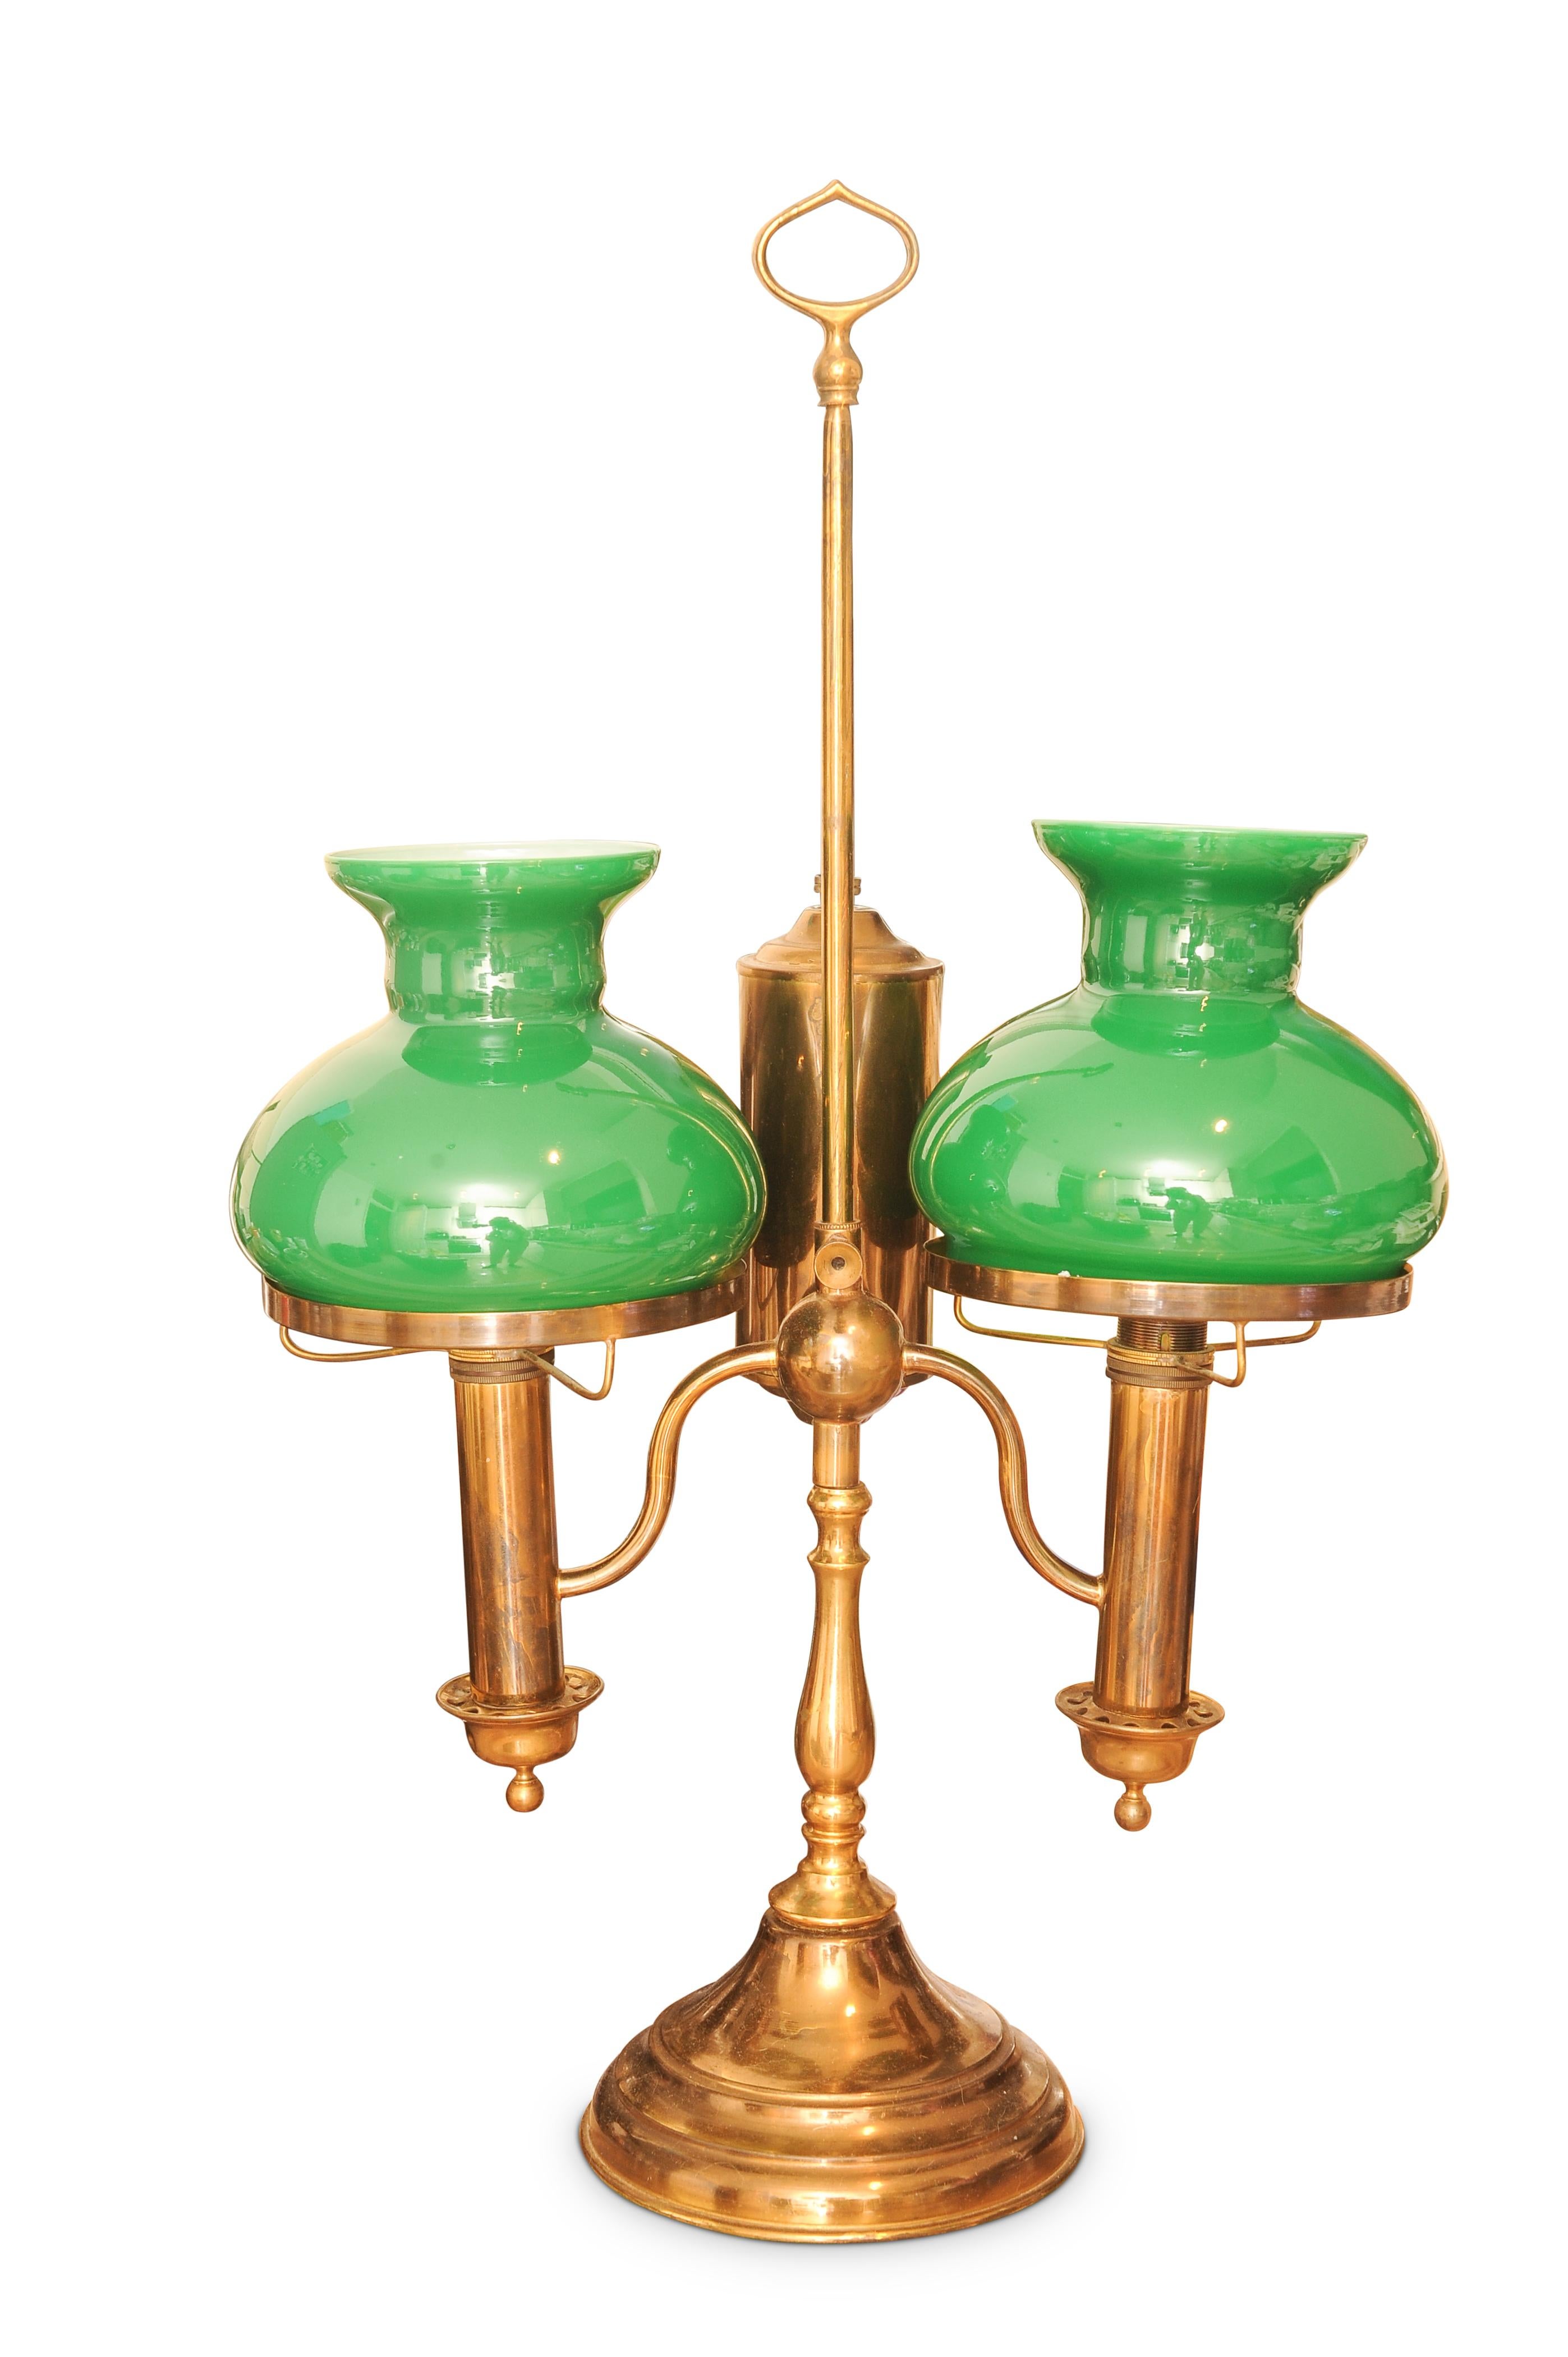 1800s lamps